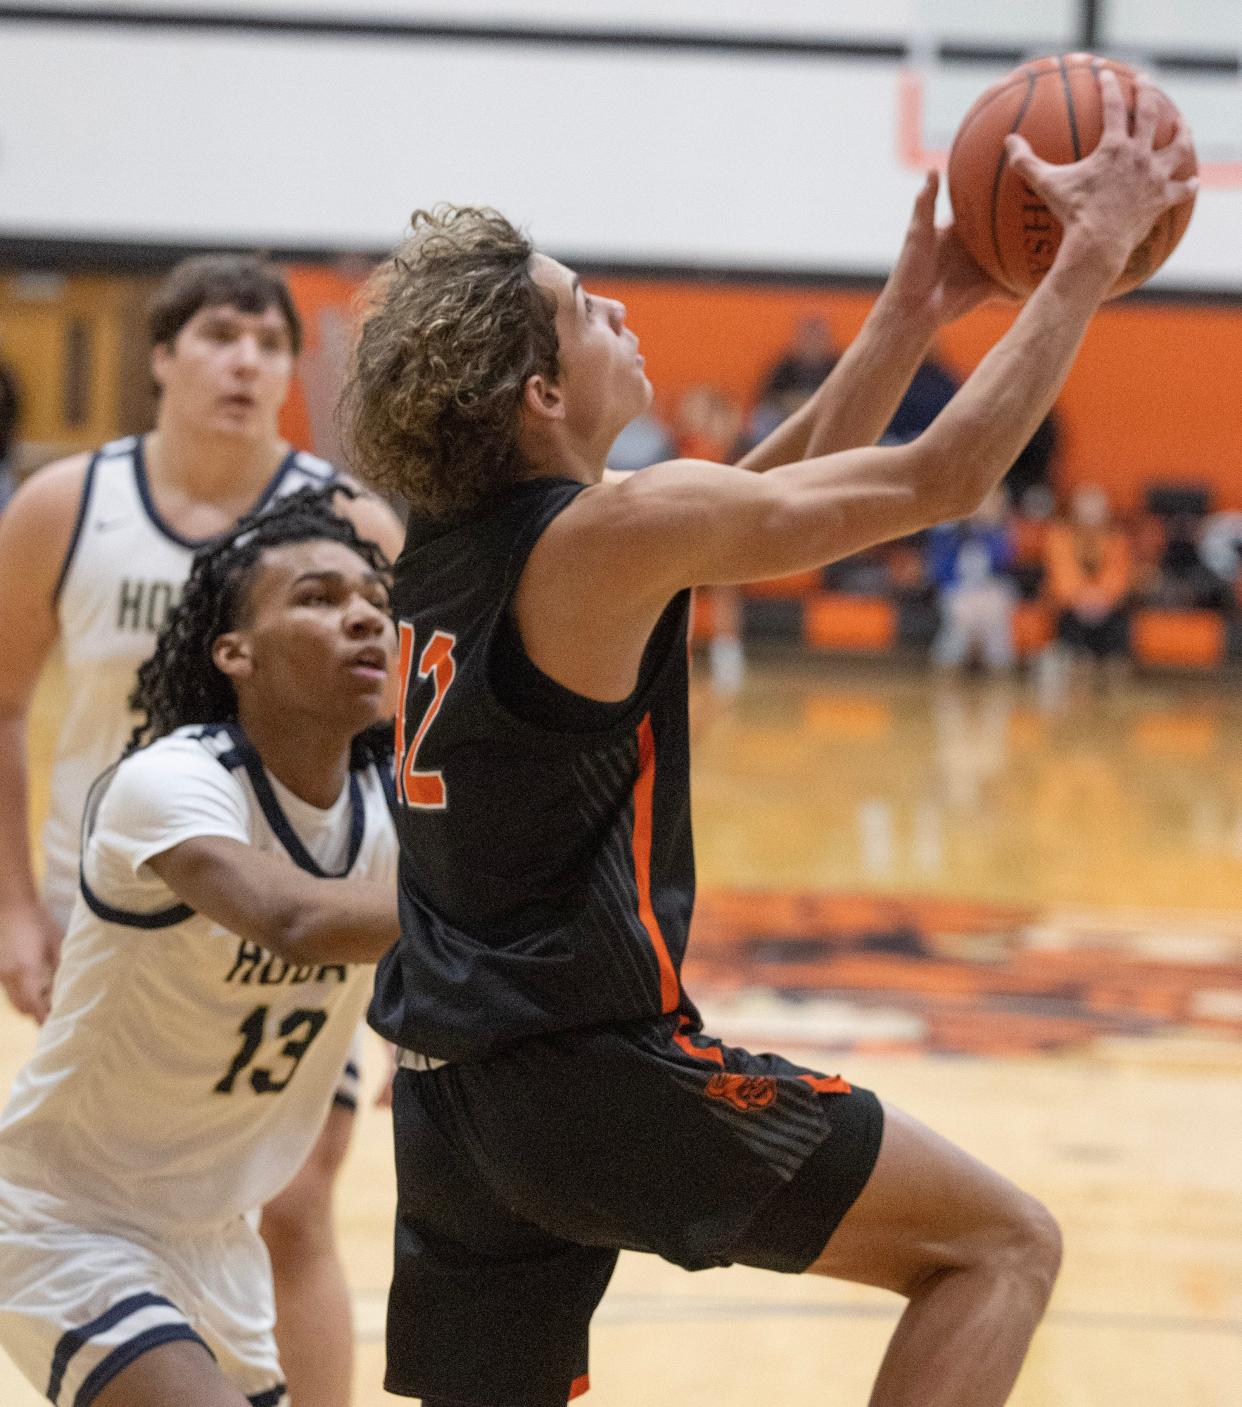 Hoover's Hunter Hershberger goes to the hoop in the first half with pressure from Hoban's Deron Jennings.